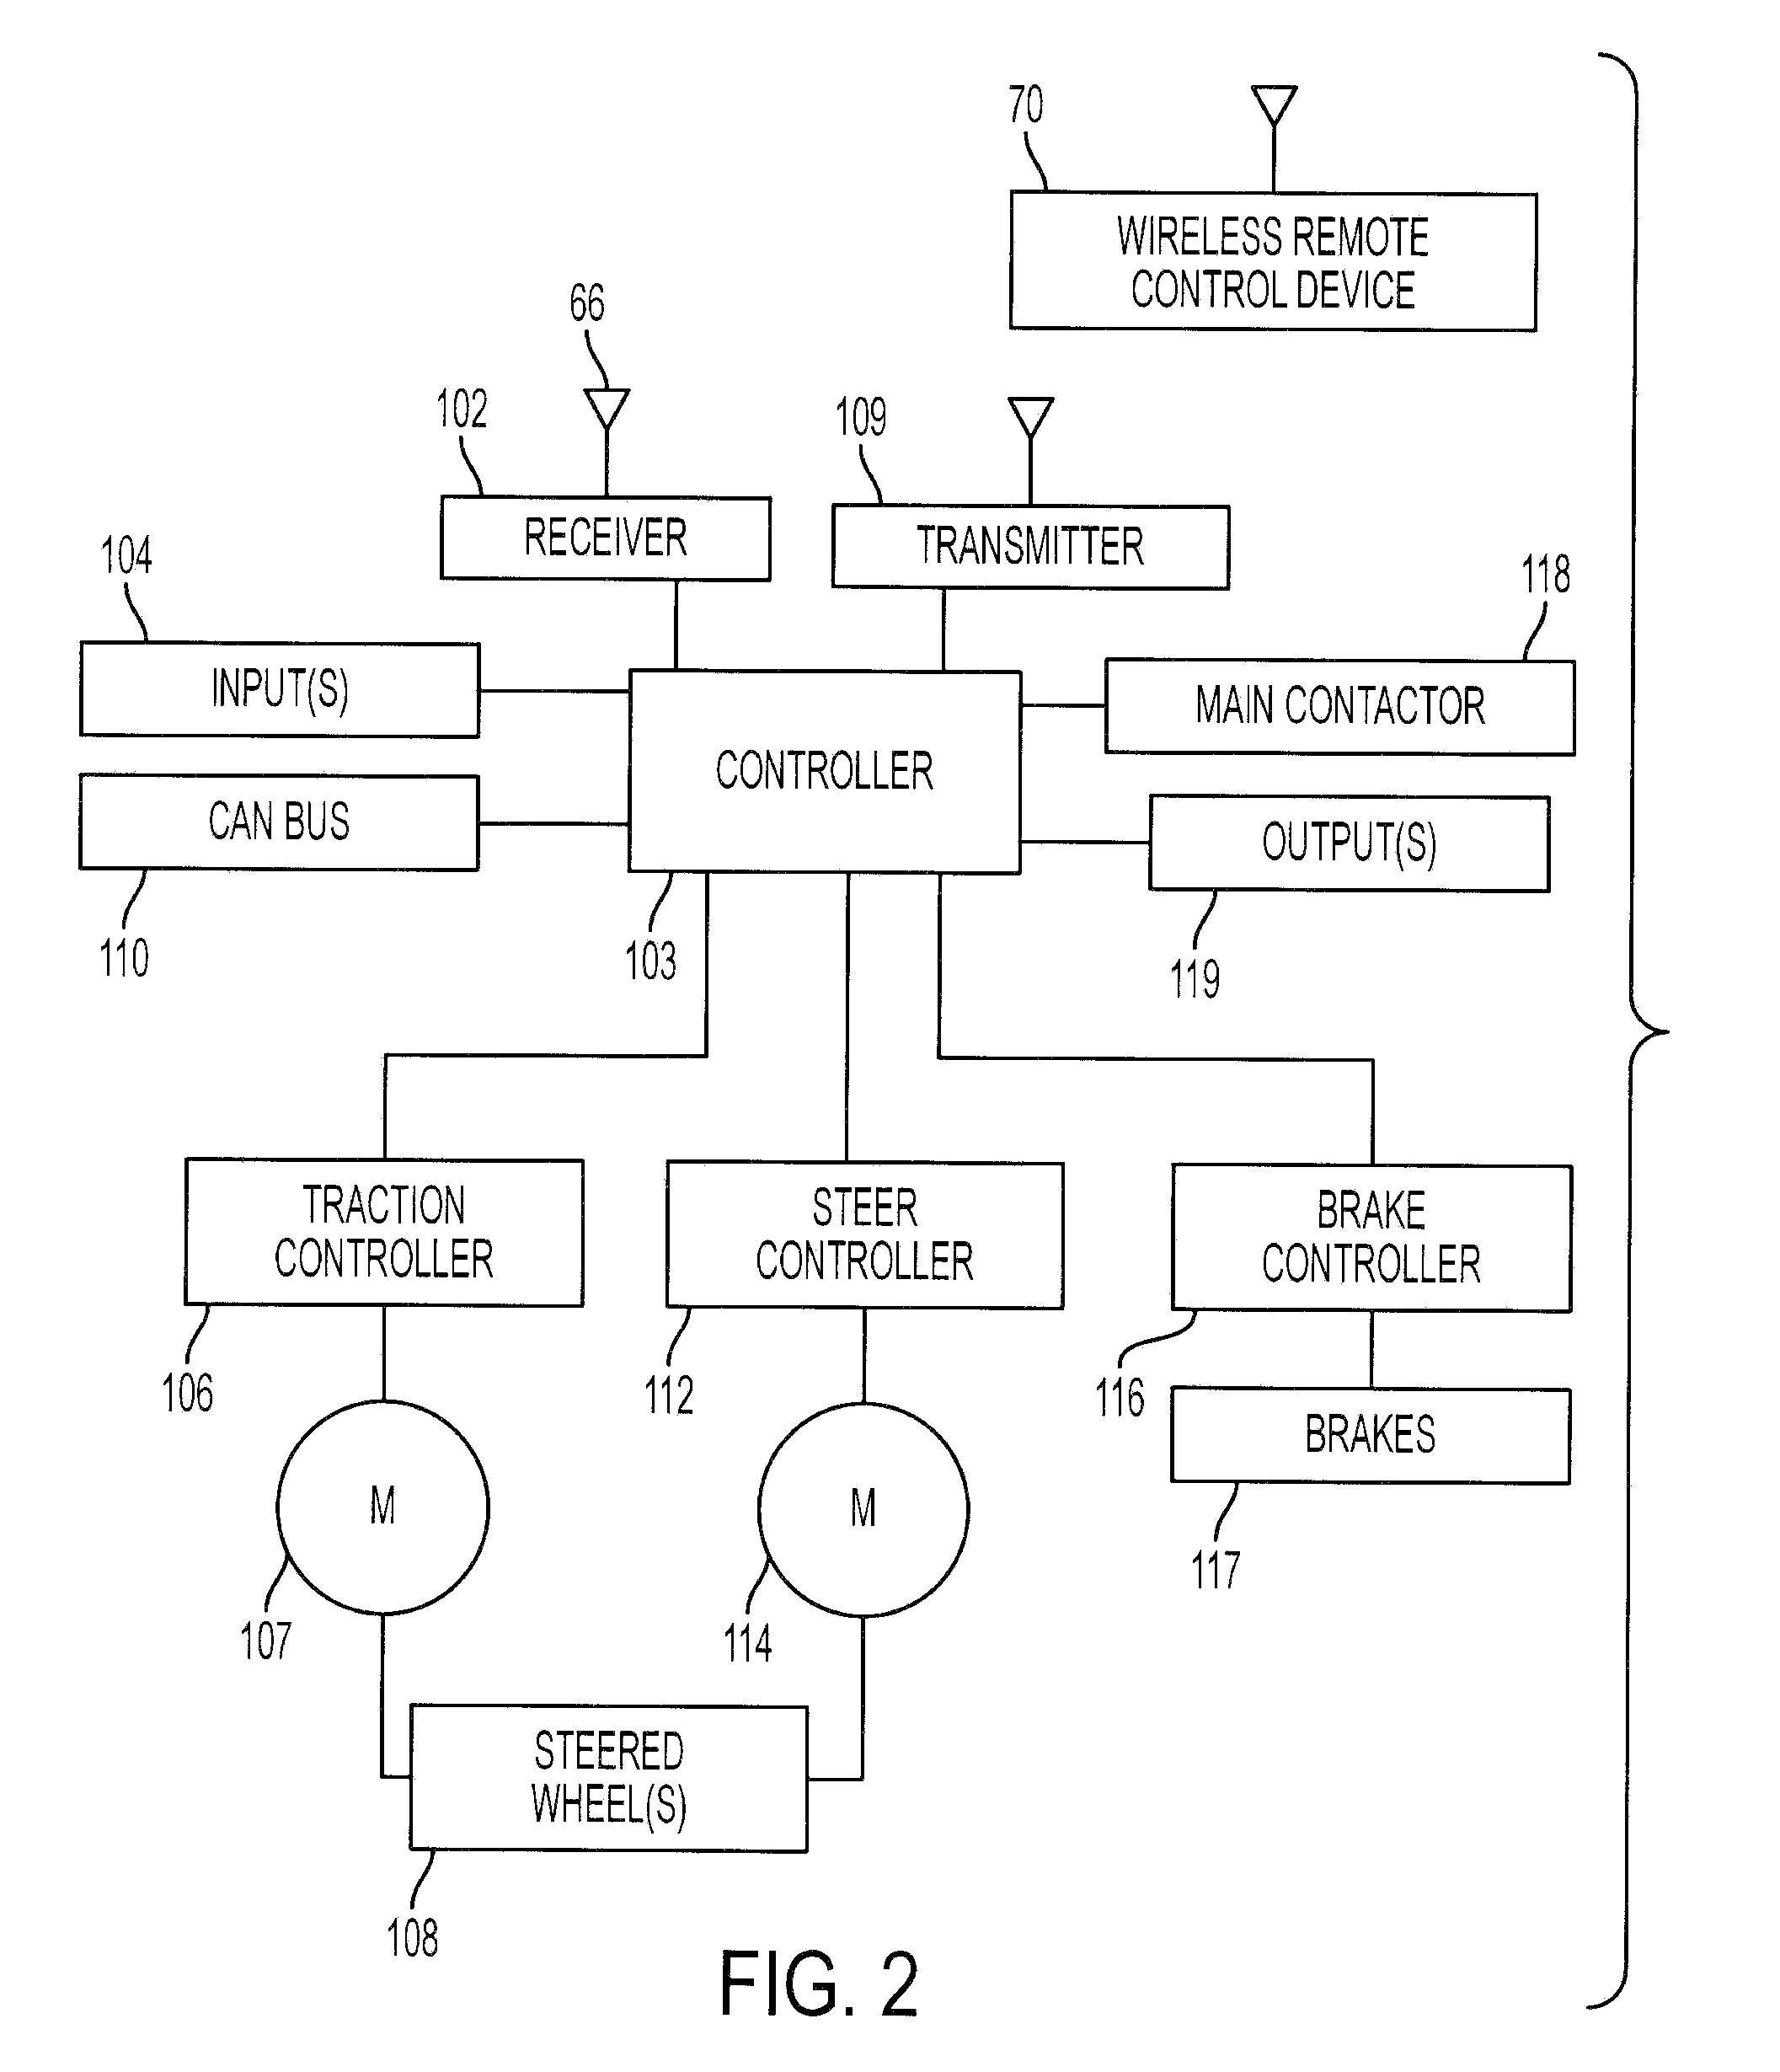 Apparatus for remotely controlling a materials handling vehicle